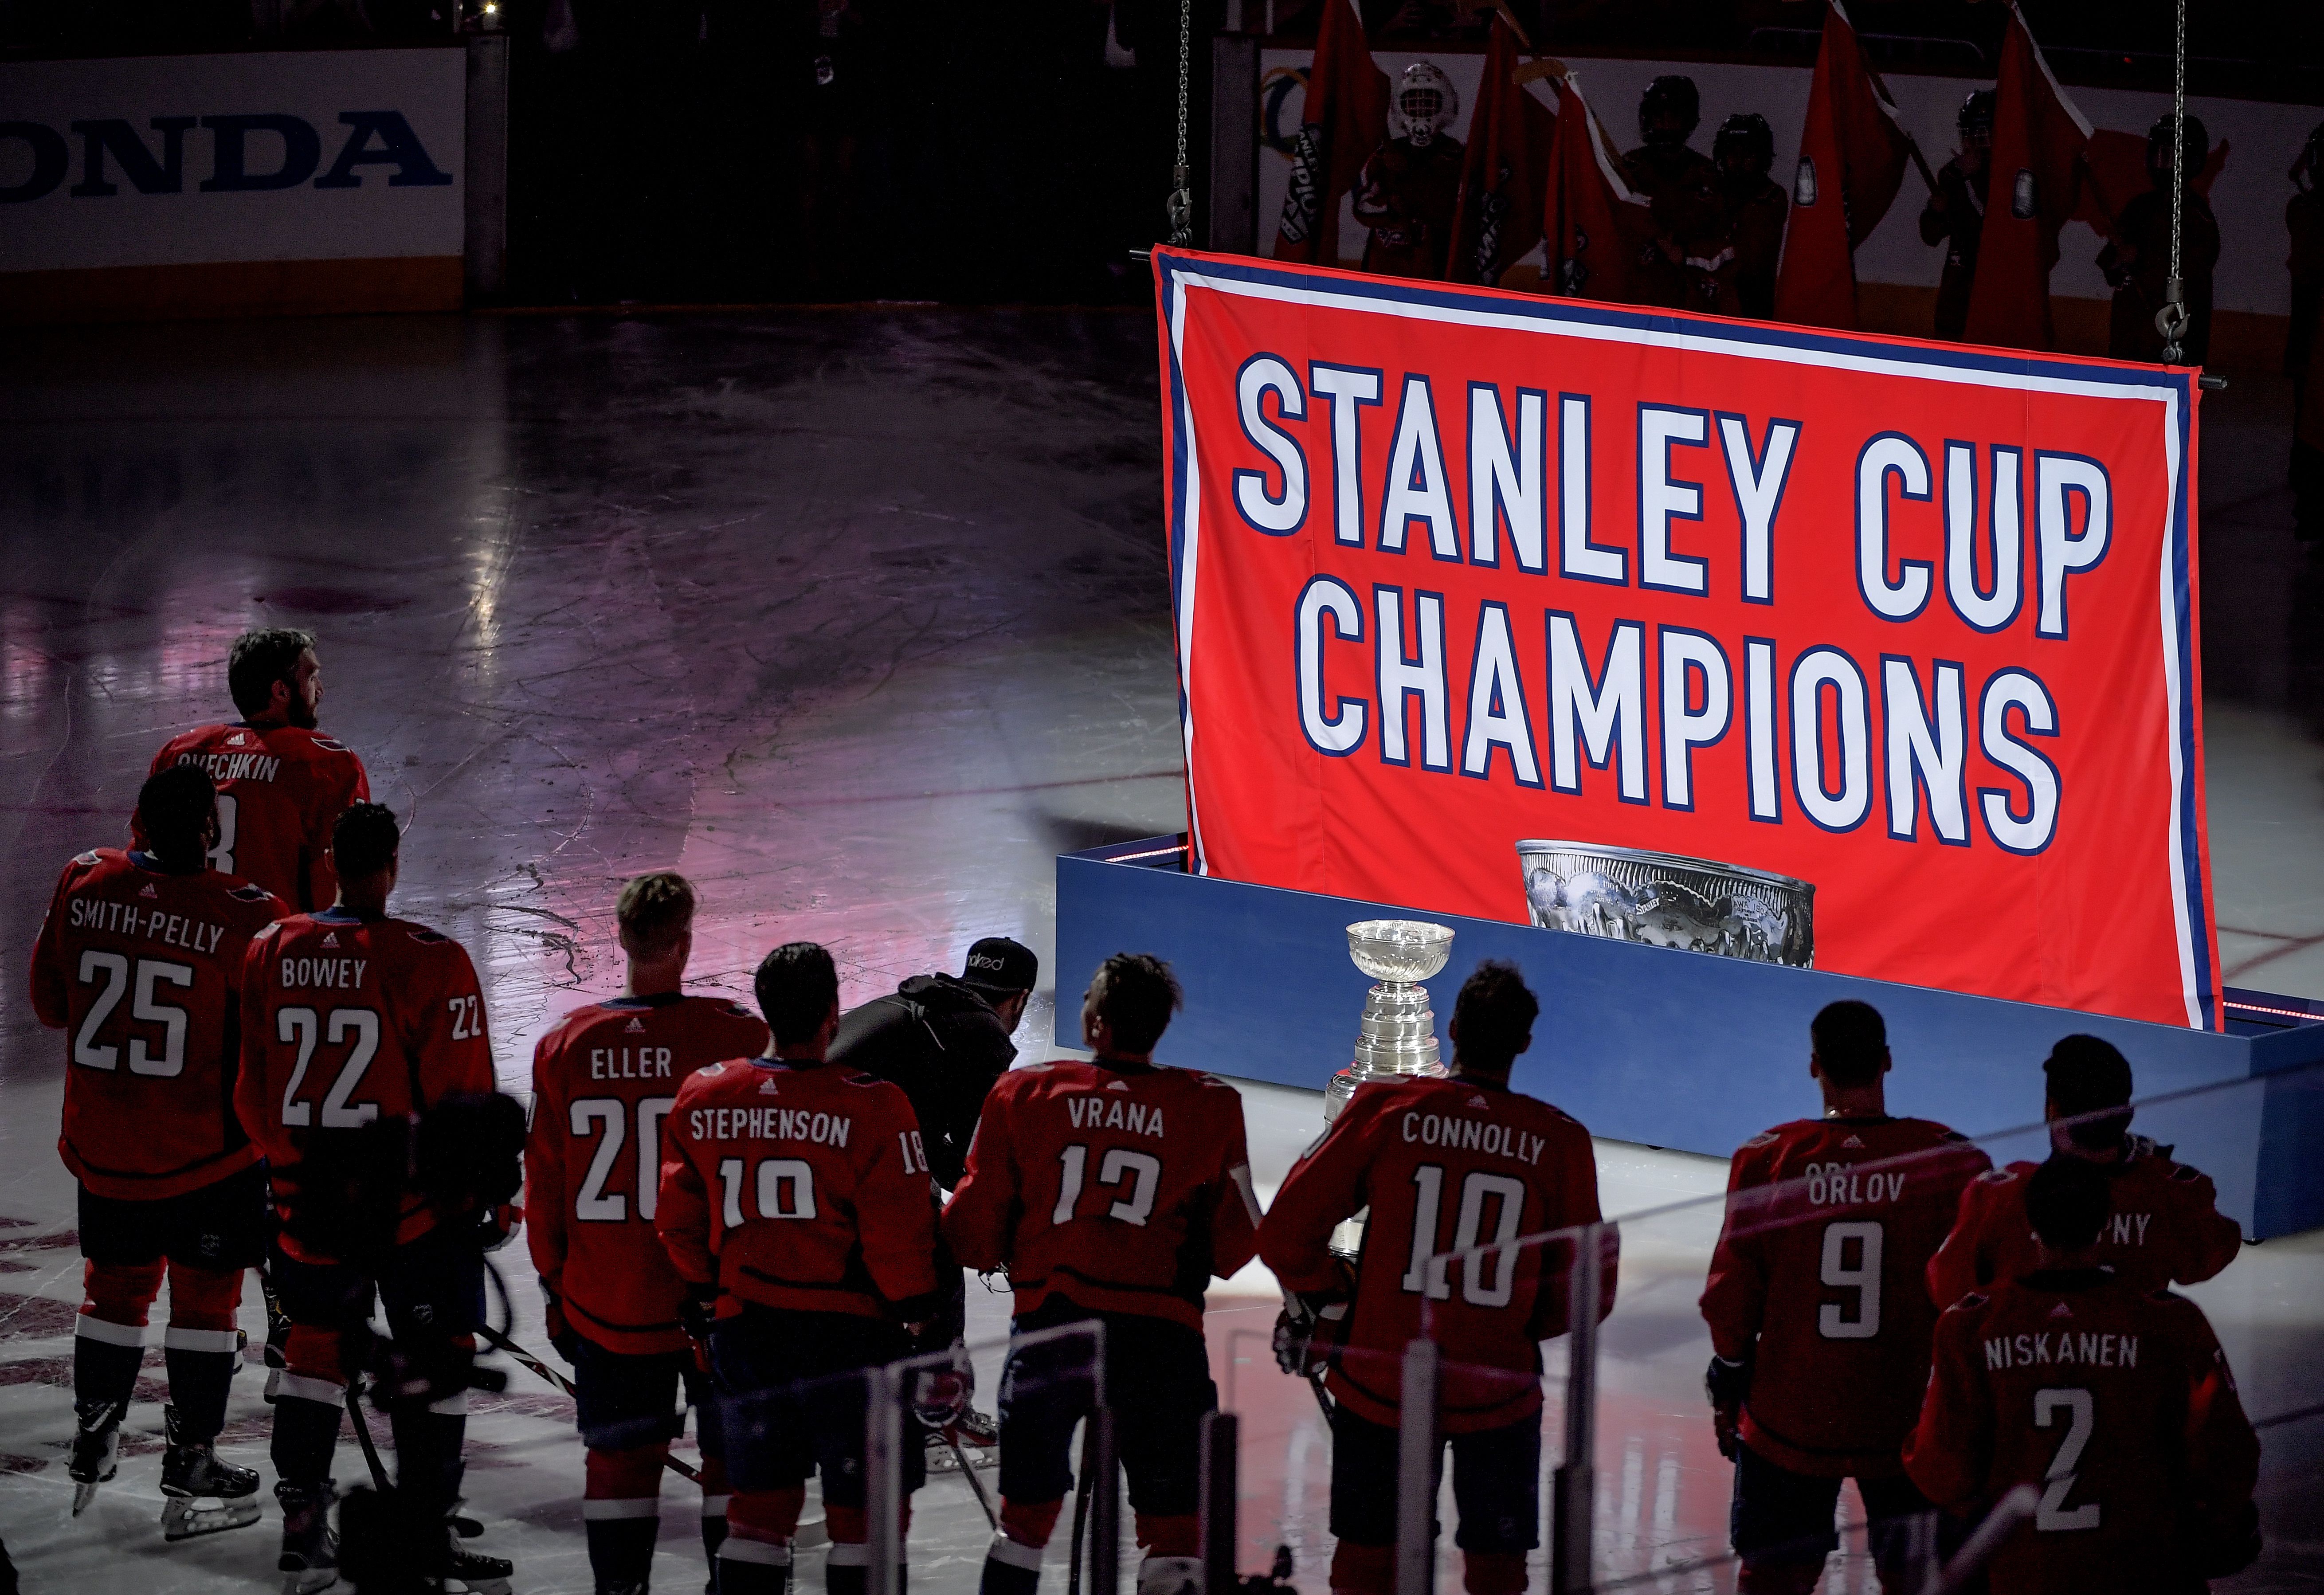 Capitals raise their first Stanley Cup banner in a red-rocking scene of  revelry - The Washington Post